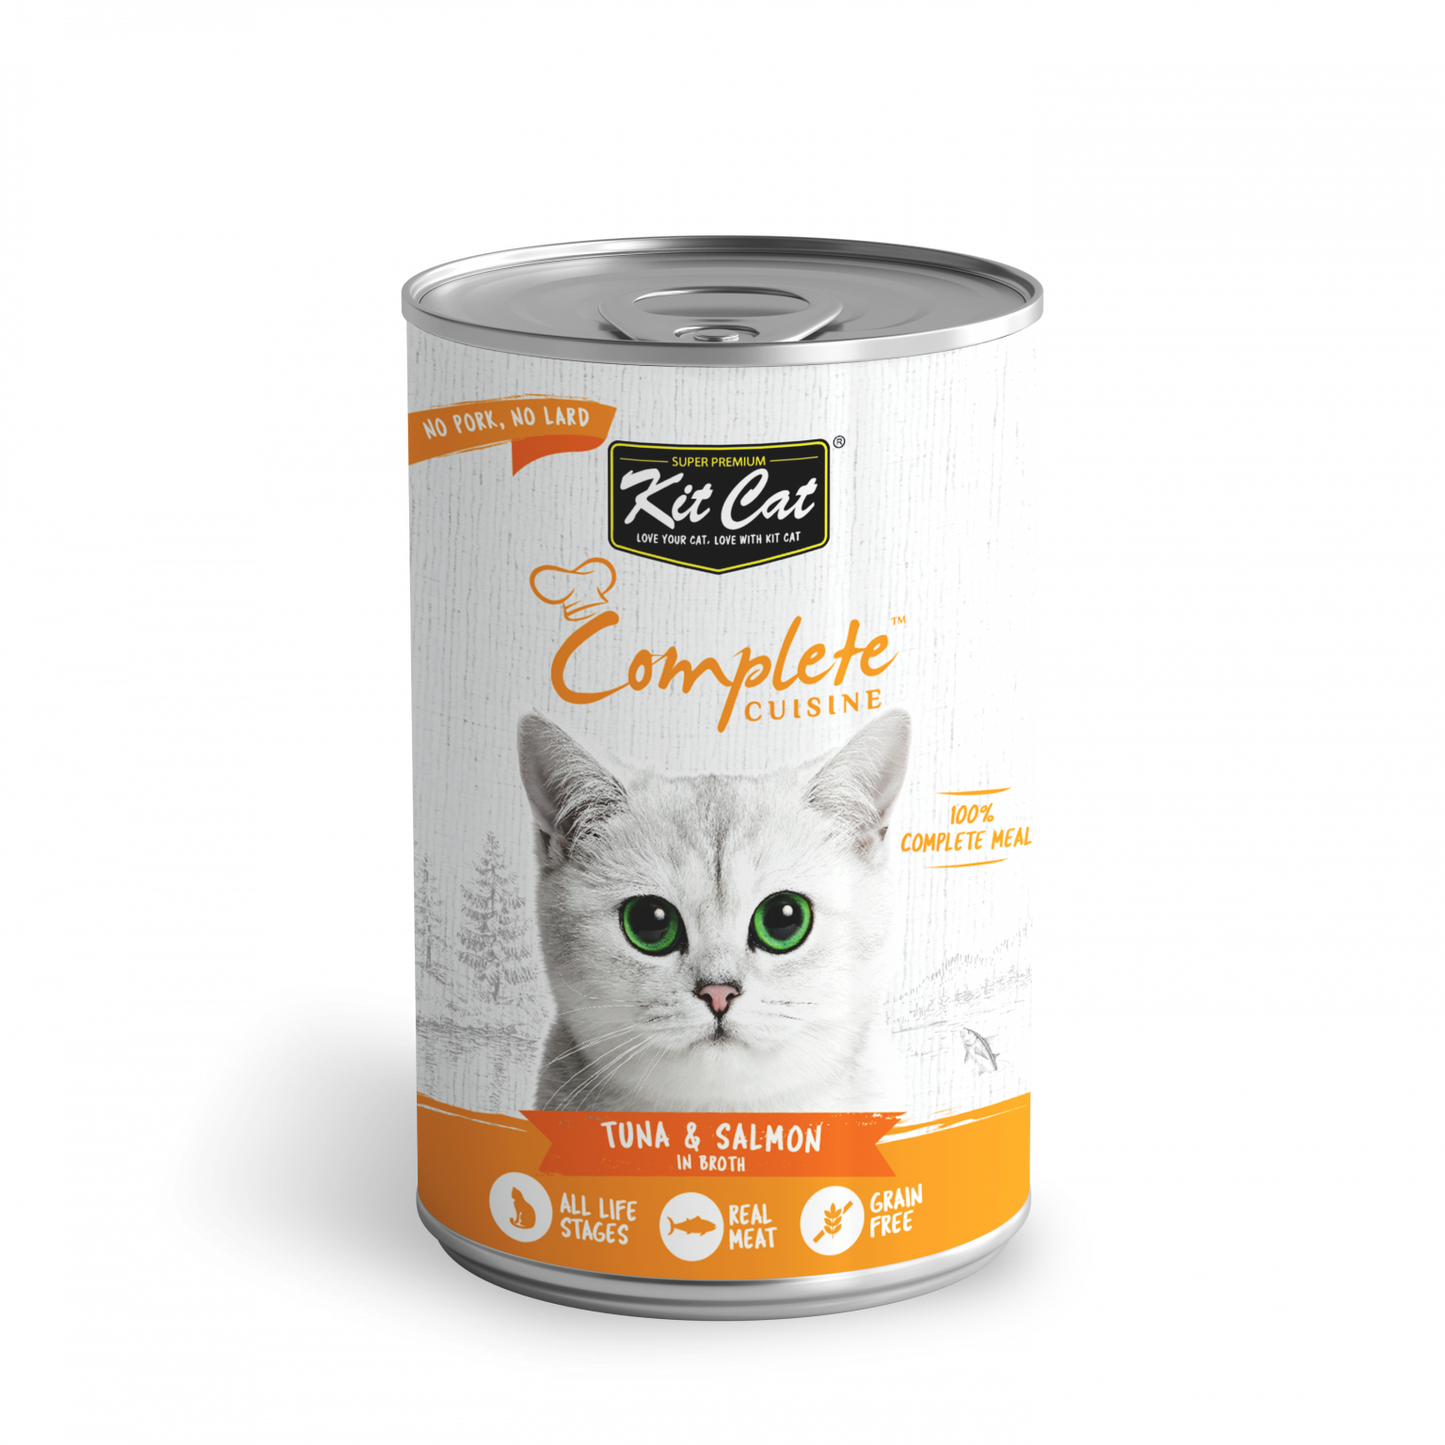 Kit Cat Complete Cuisine Tuna And Salmon In Broth